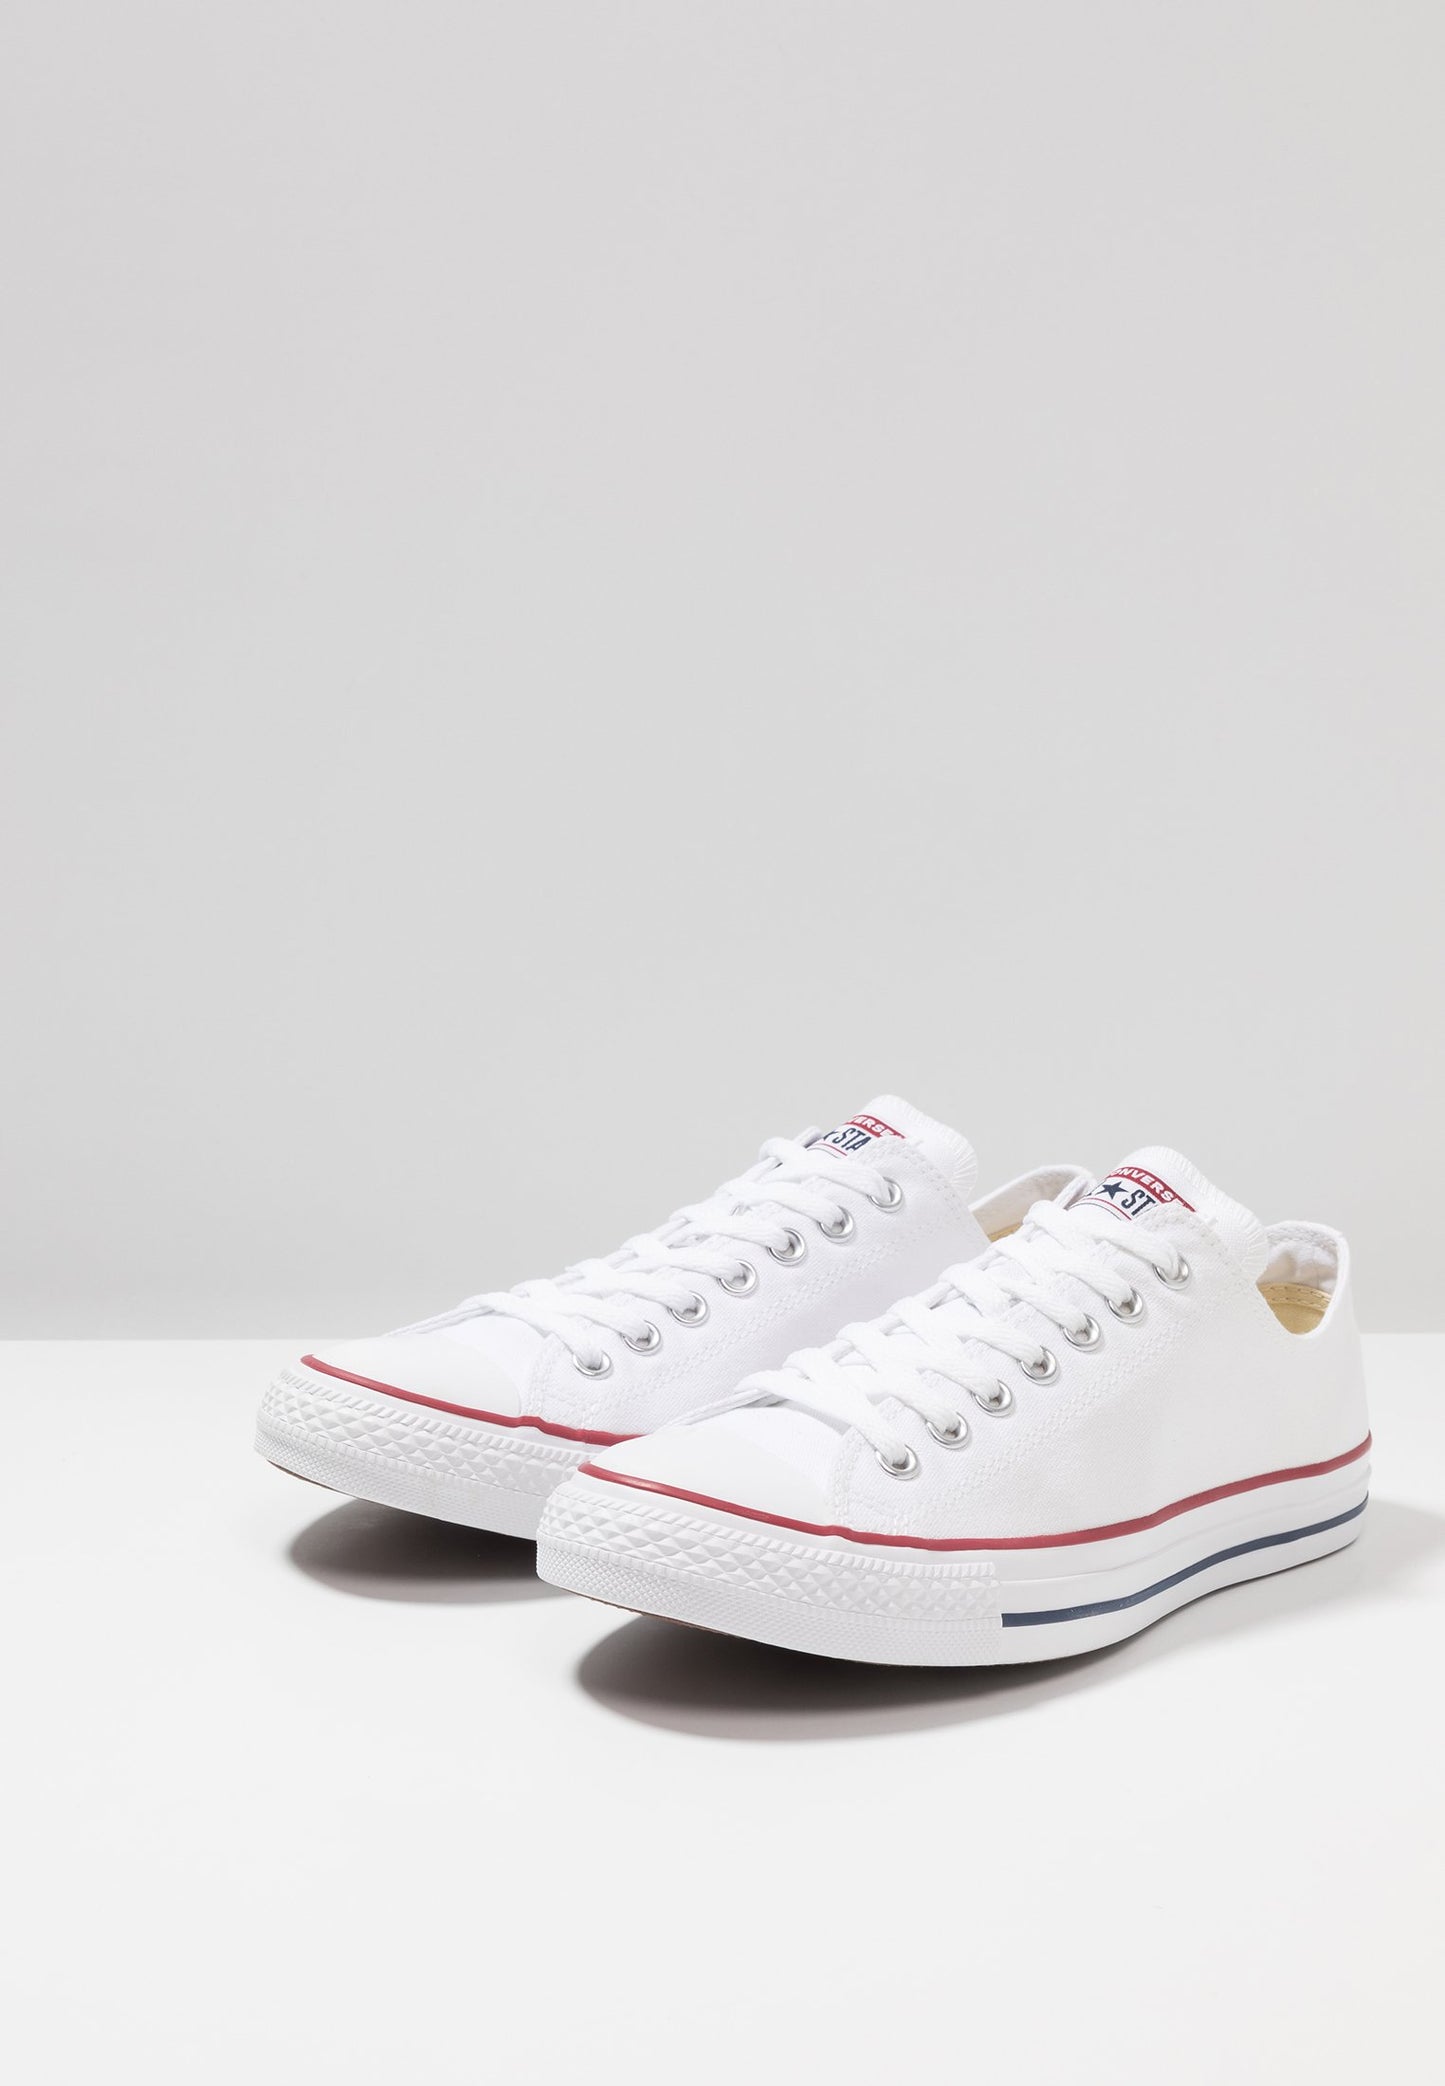 CHUCK TAYLOR ALL STAR OX UNISEX - WHITE Baskets basses